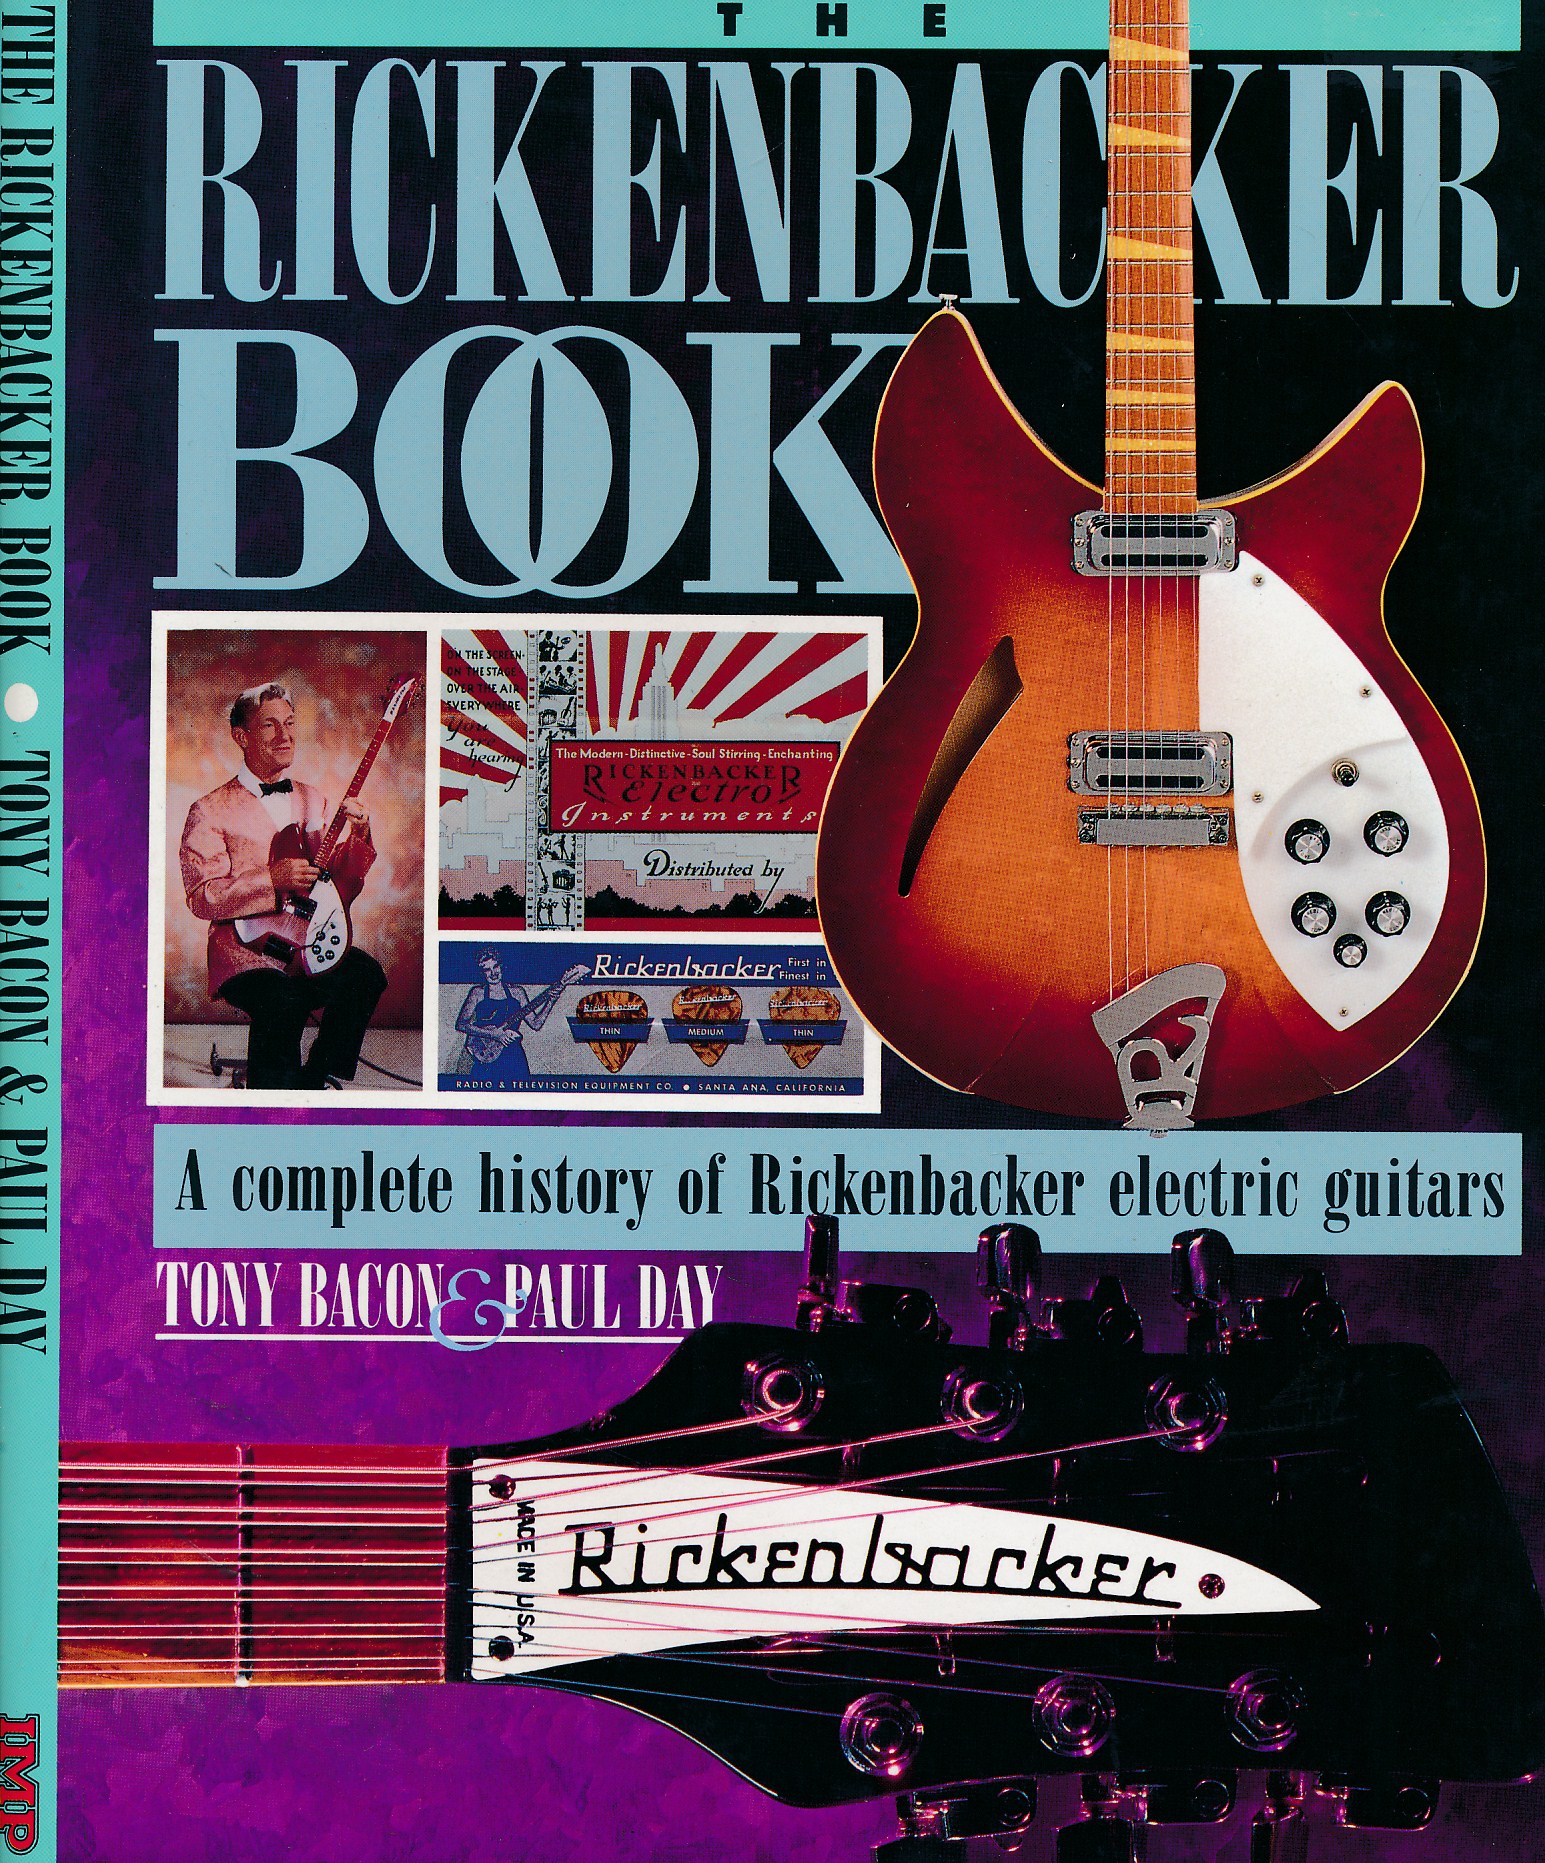 The Rickenbacker Book. A Complete History of Rickenbacker Electric Guitars